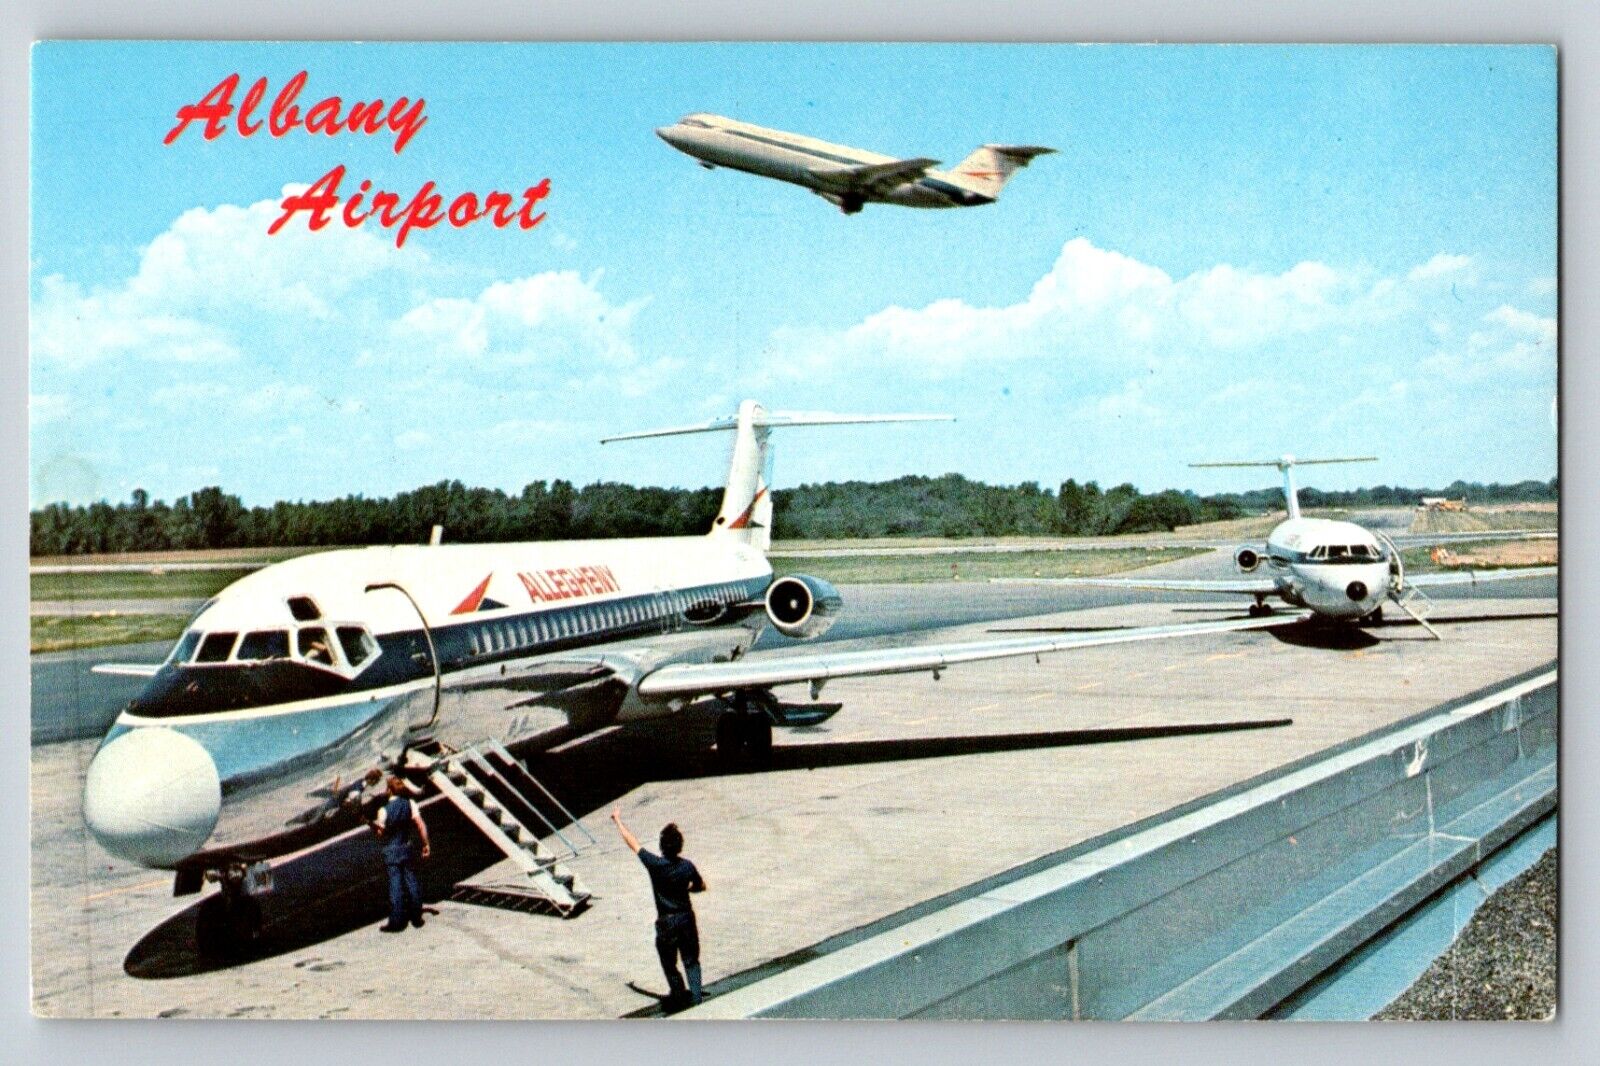 Allegheny Airlines at Albany NY Airport Postcard